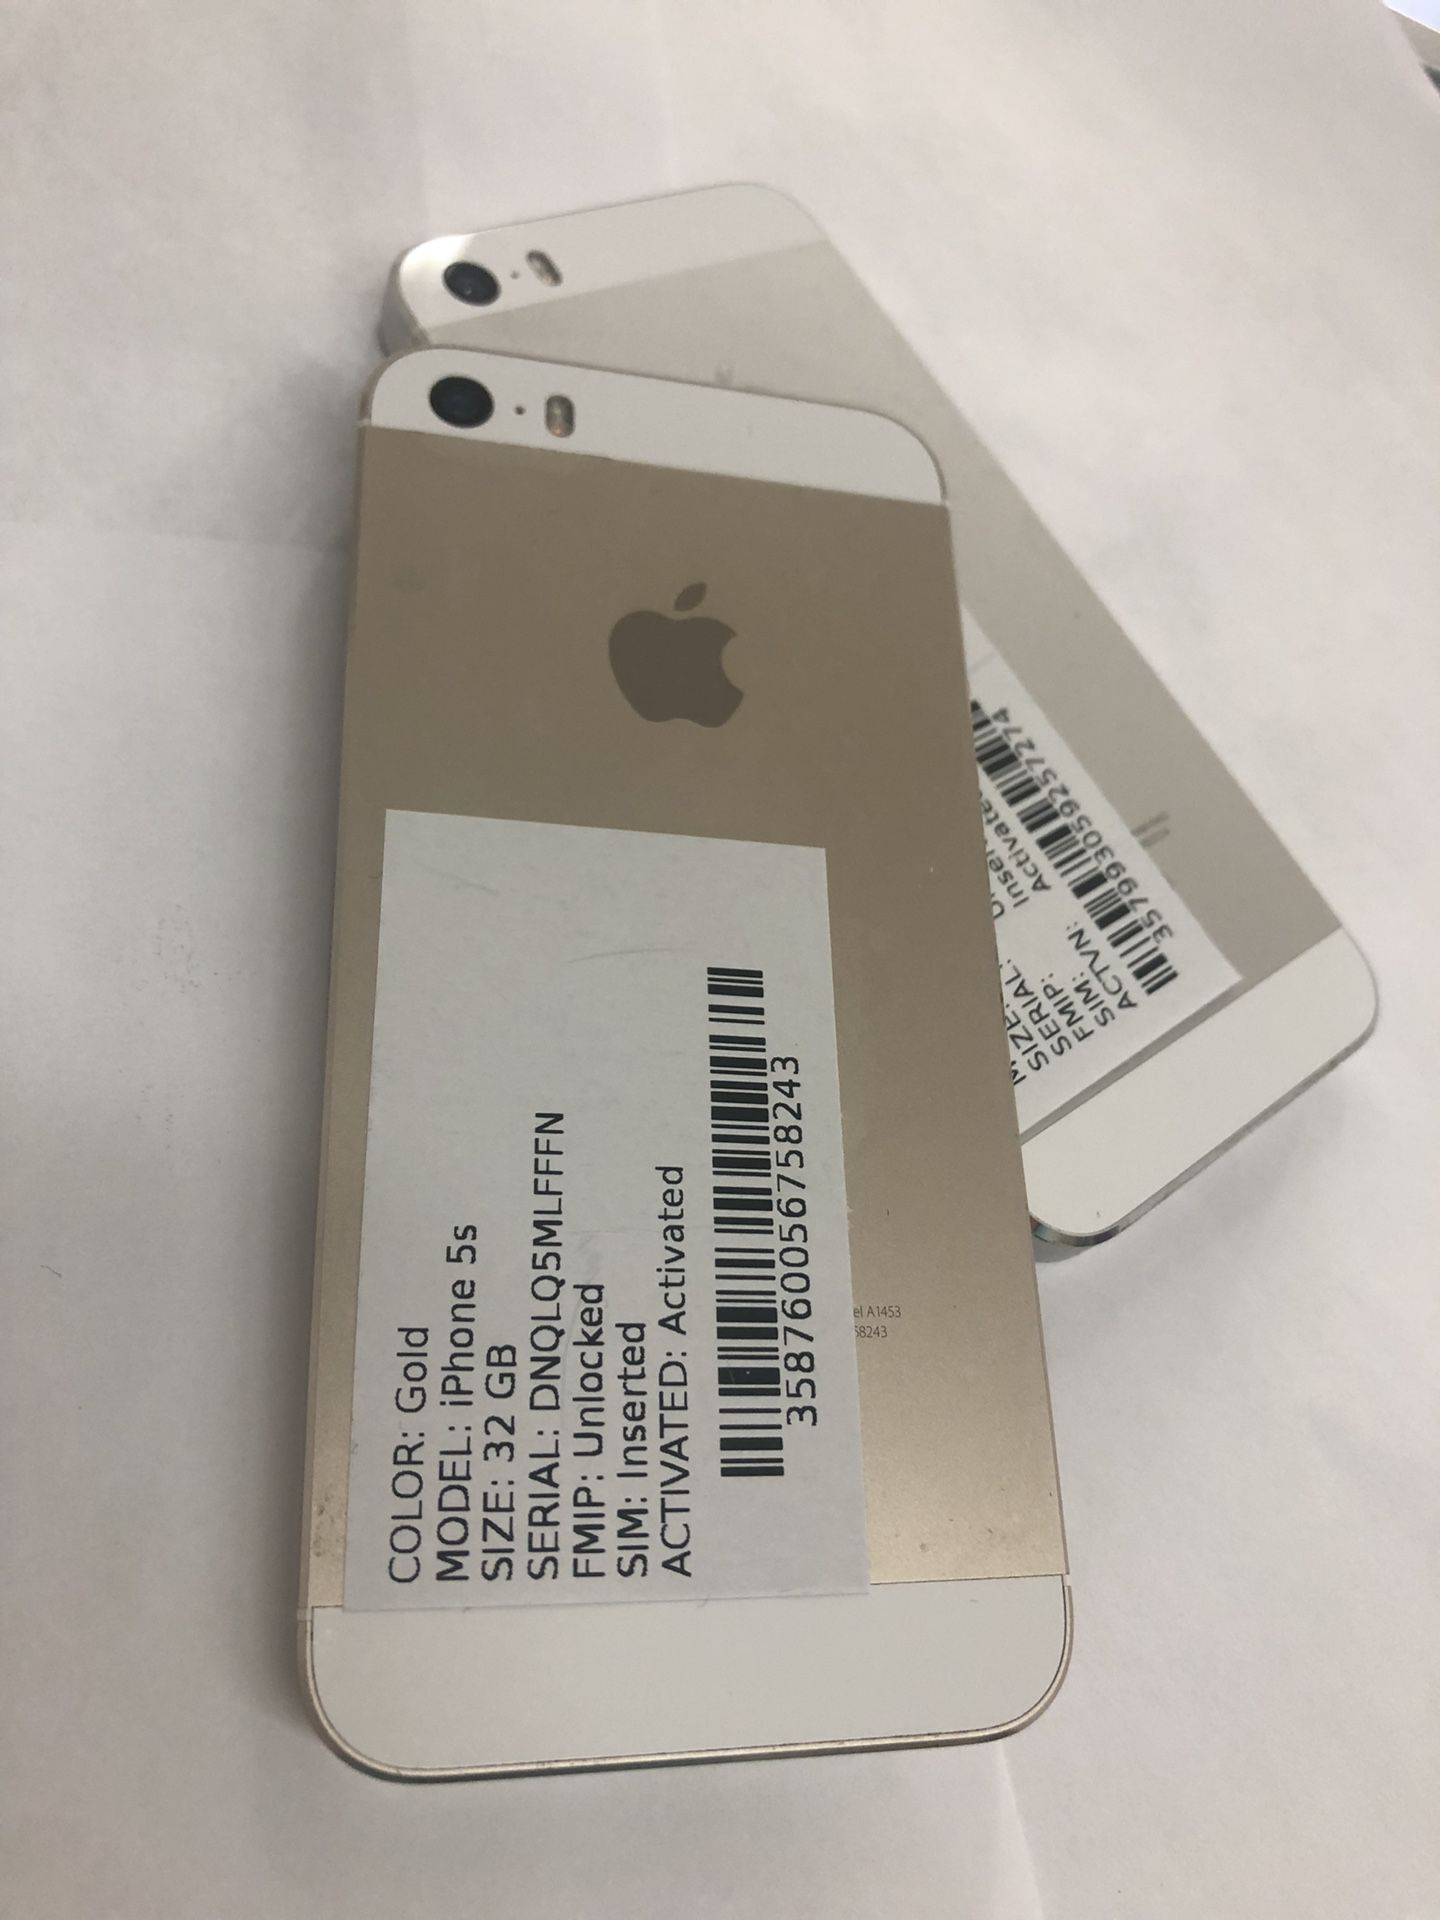 iPhone 5s 32gb each phone for Sale in MA - OfferUp